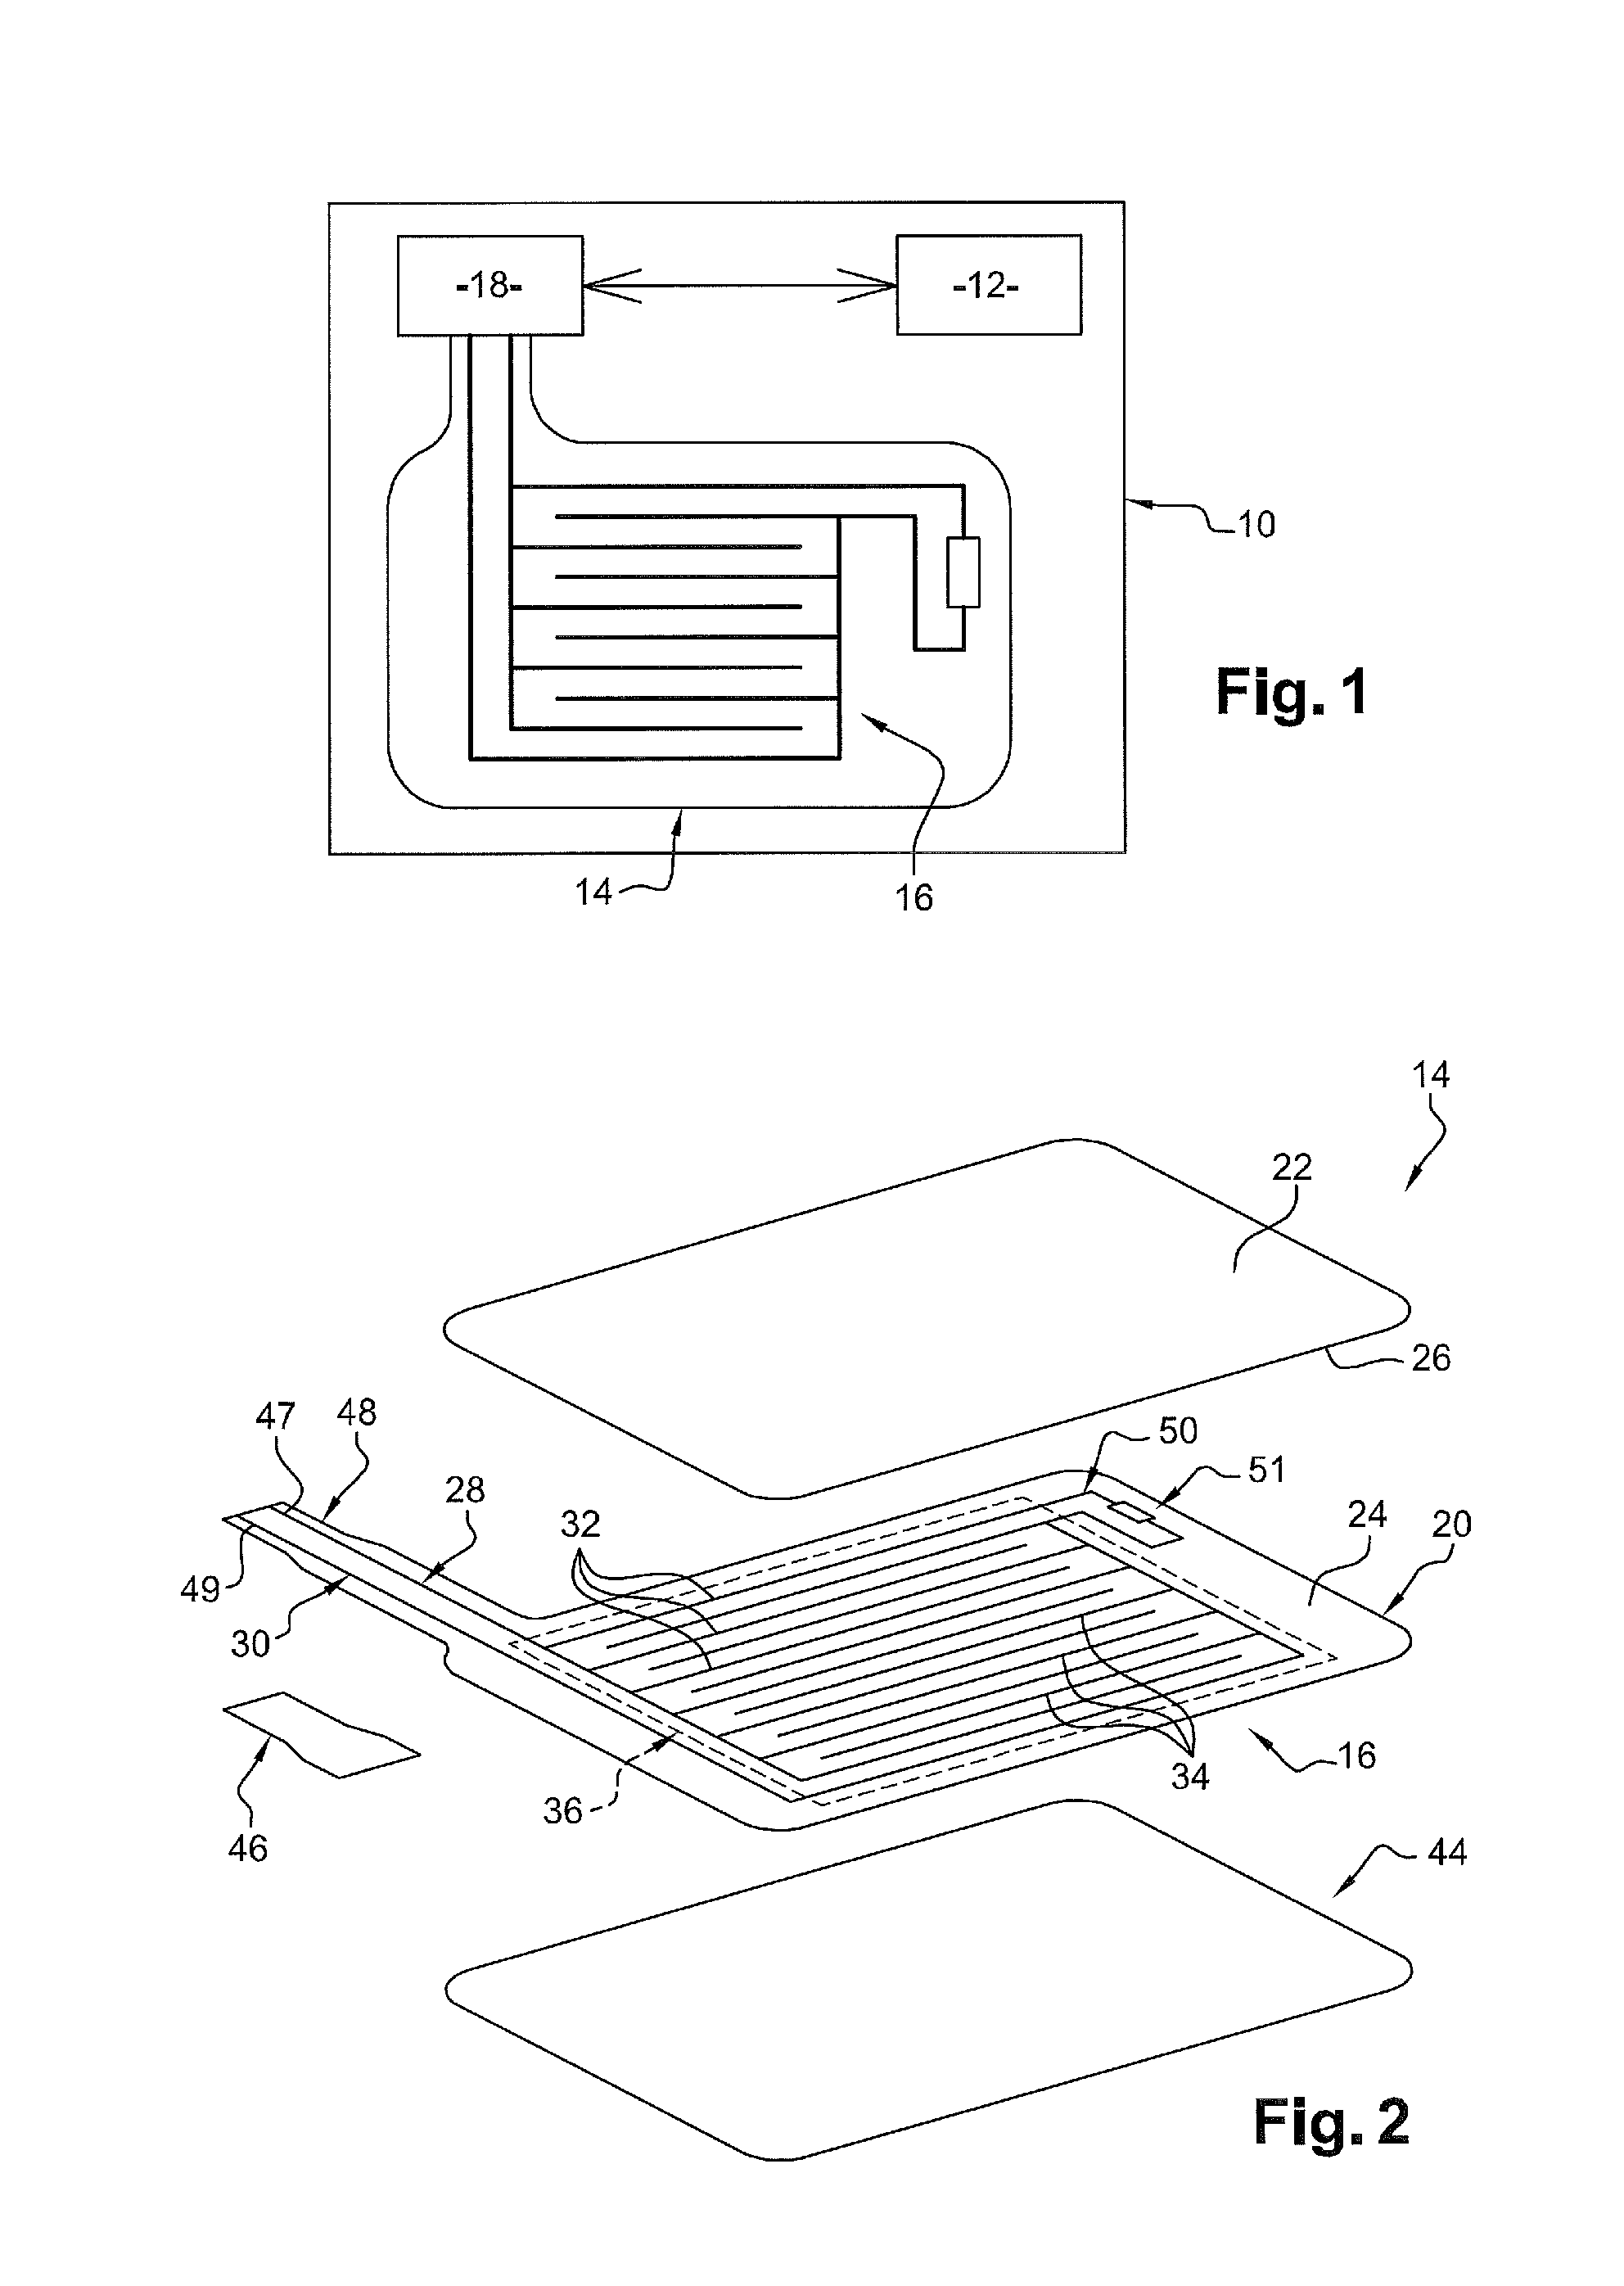 Pressure sensitive transducer assembly and control method for a system including such an assembly